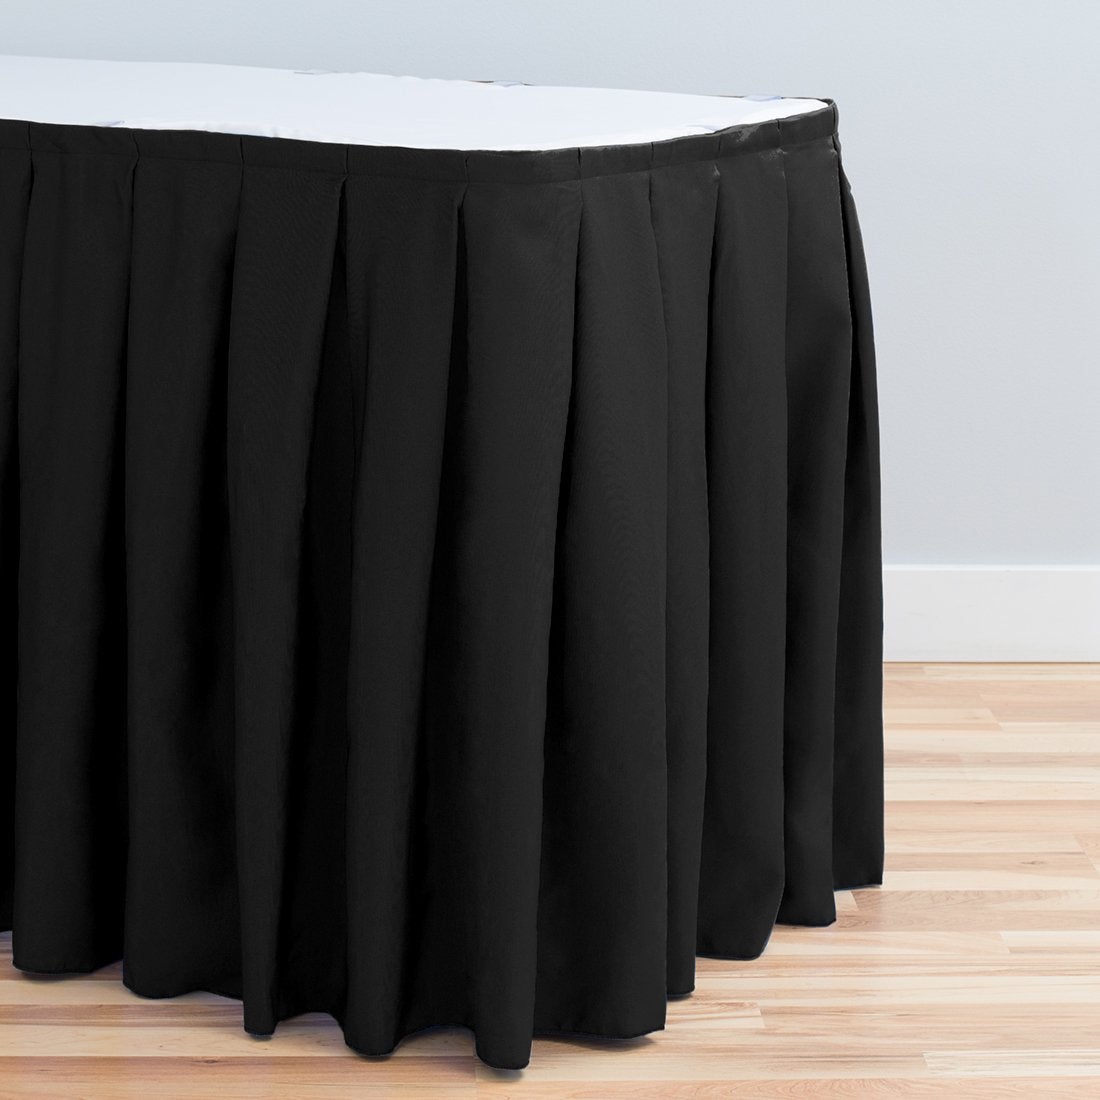 14 ft. Accordion Pleat Polyester Table Skirt (7 Colors)